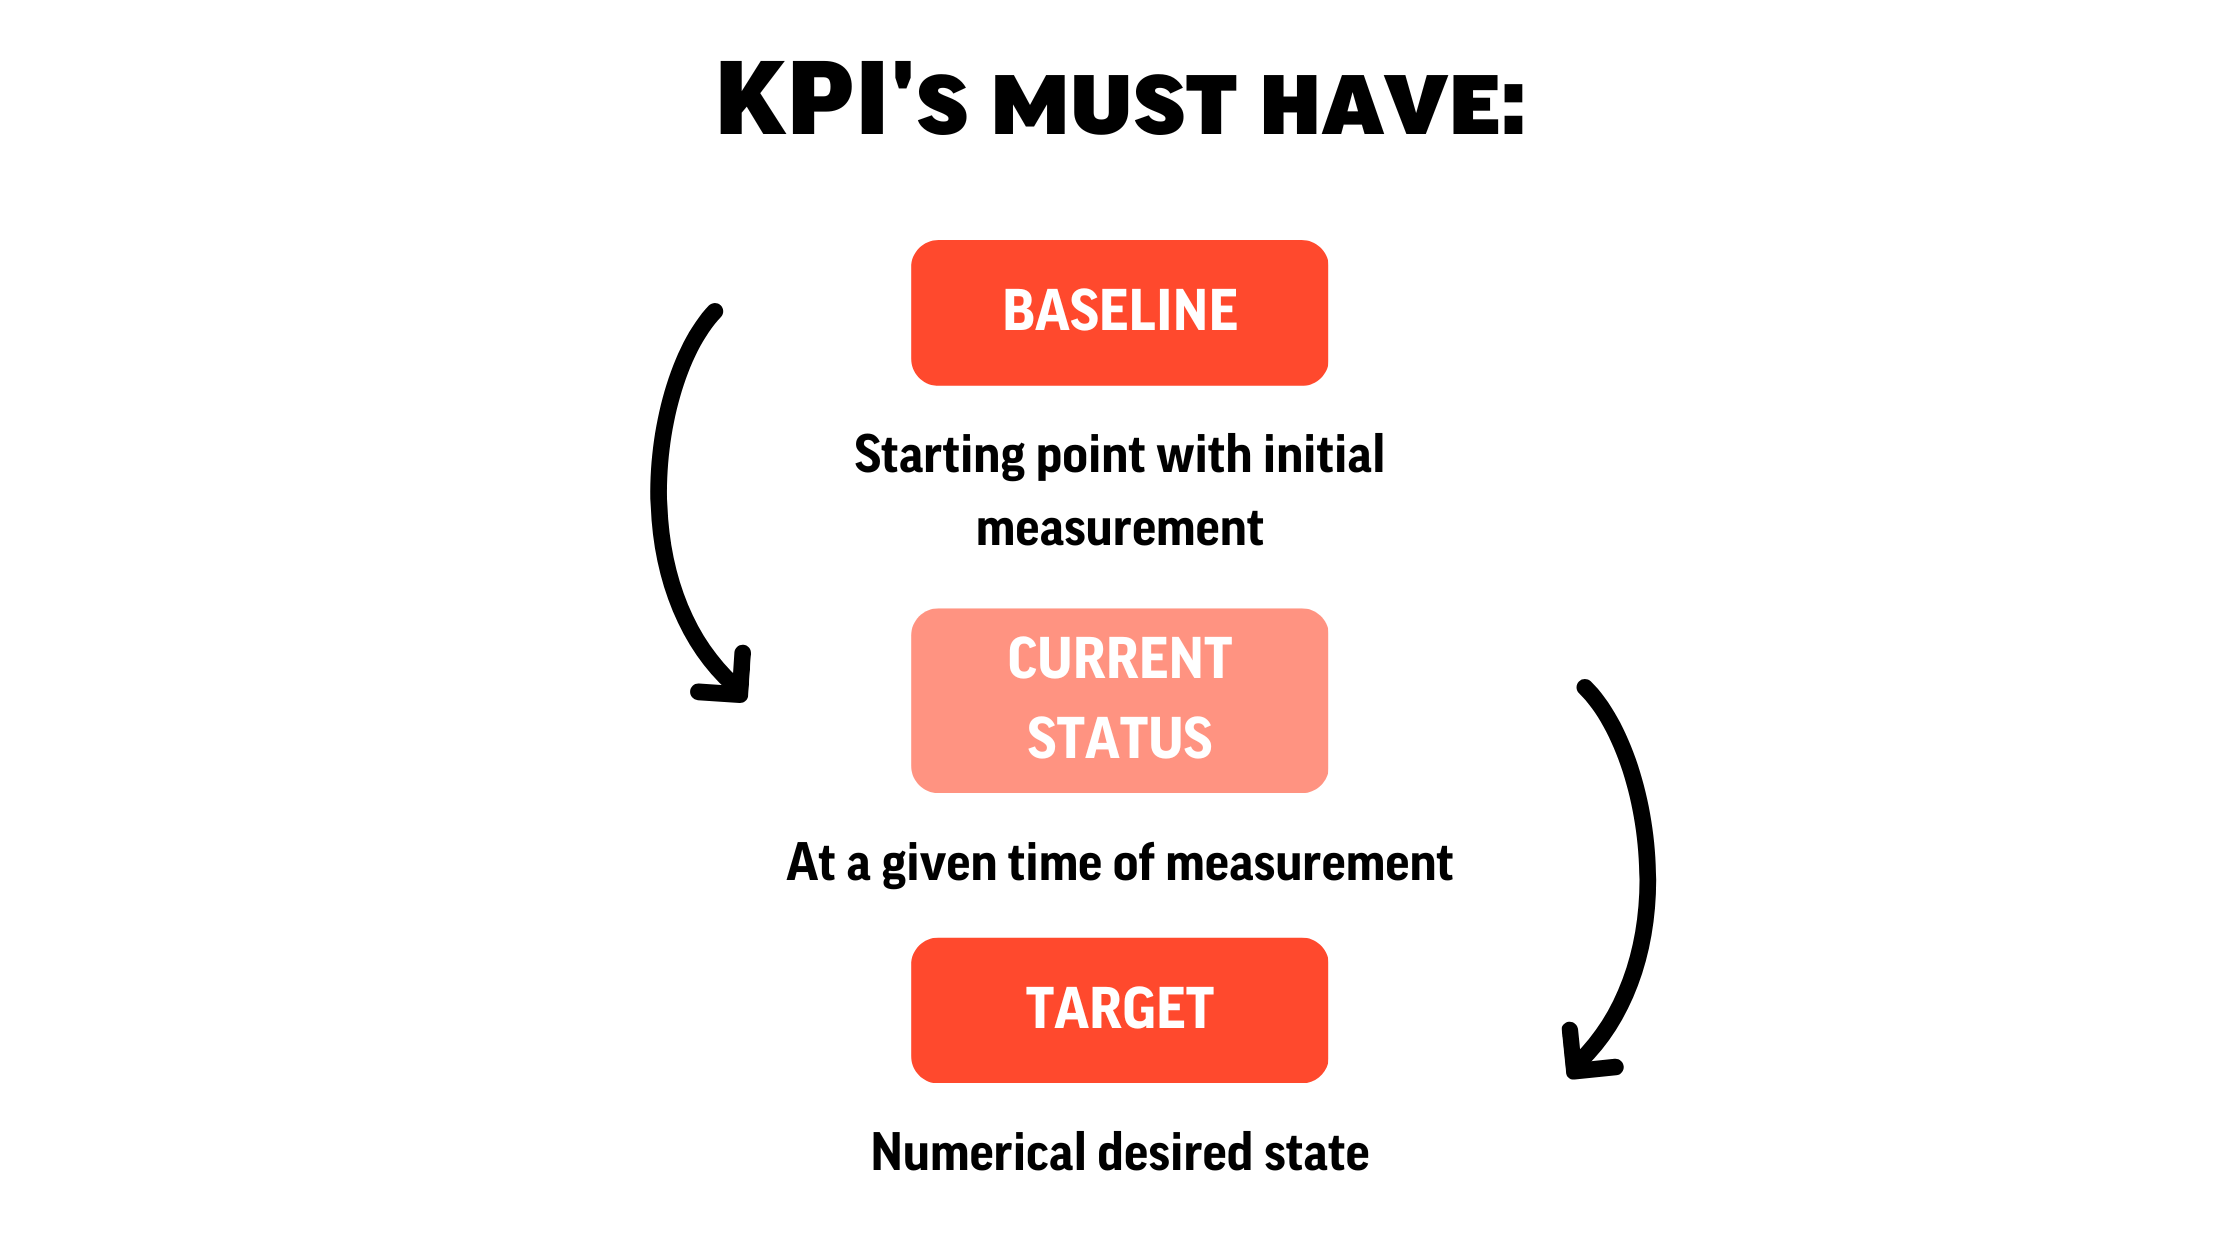 KPIs must have